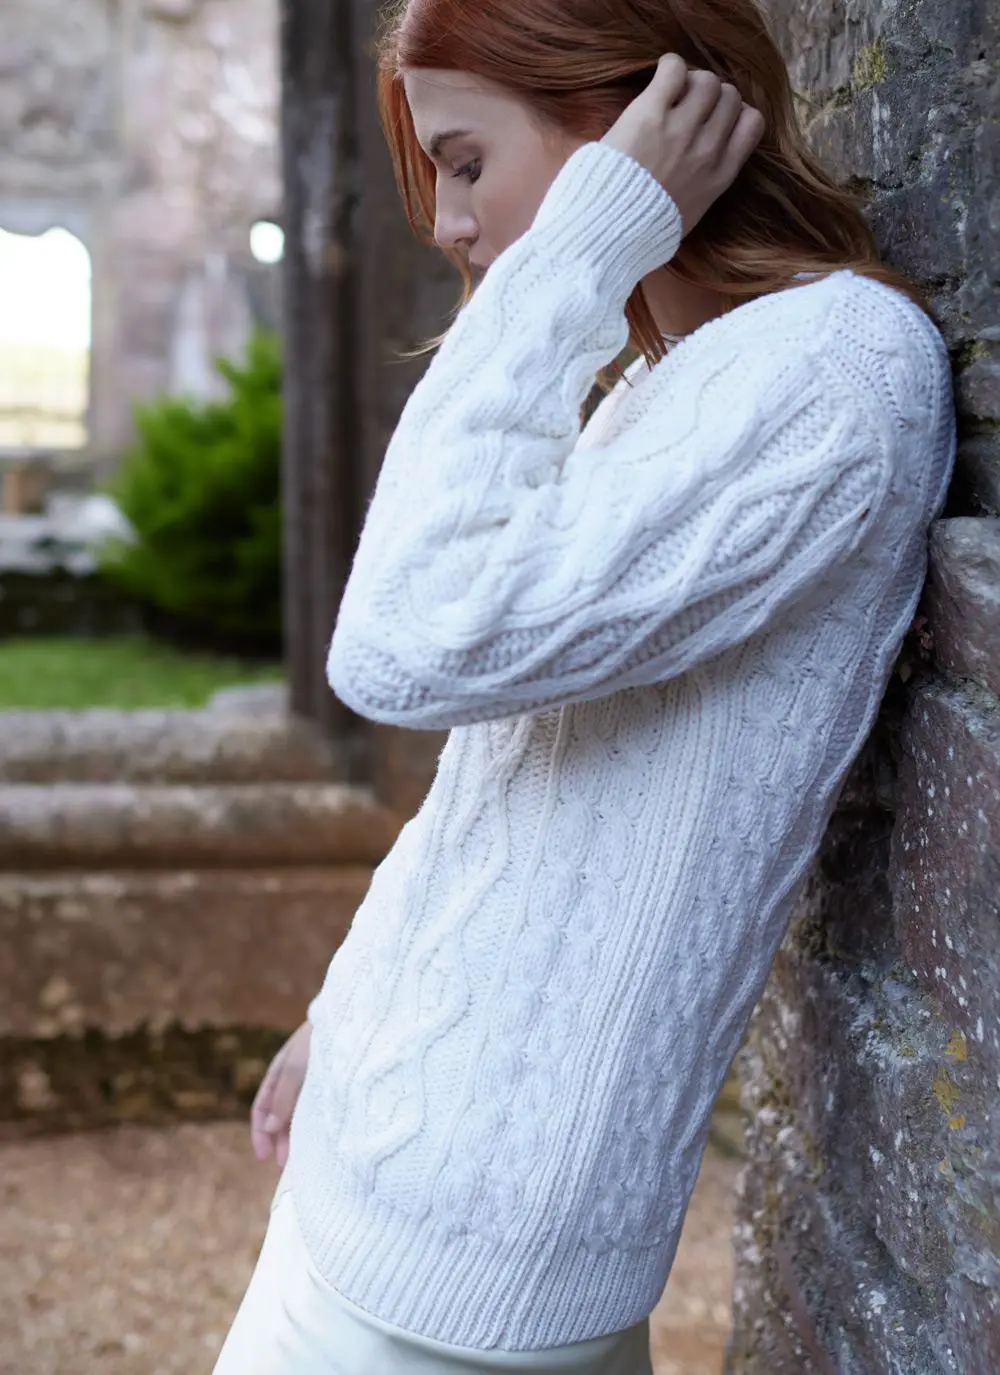 side shot of red haired woman leaning against wall in stony passageway wearing a white aran sweater